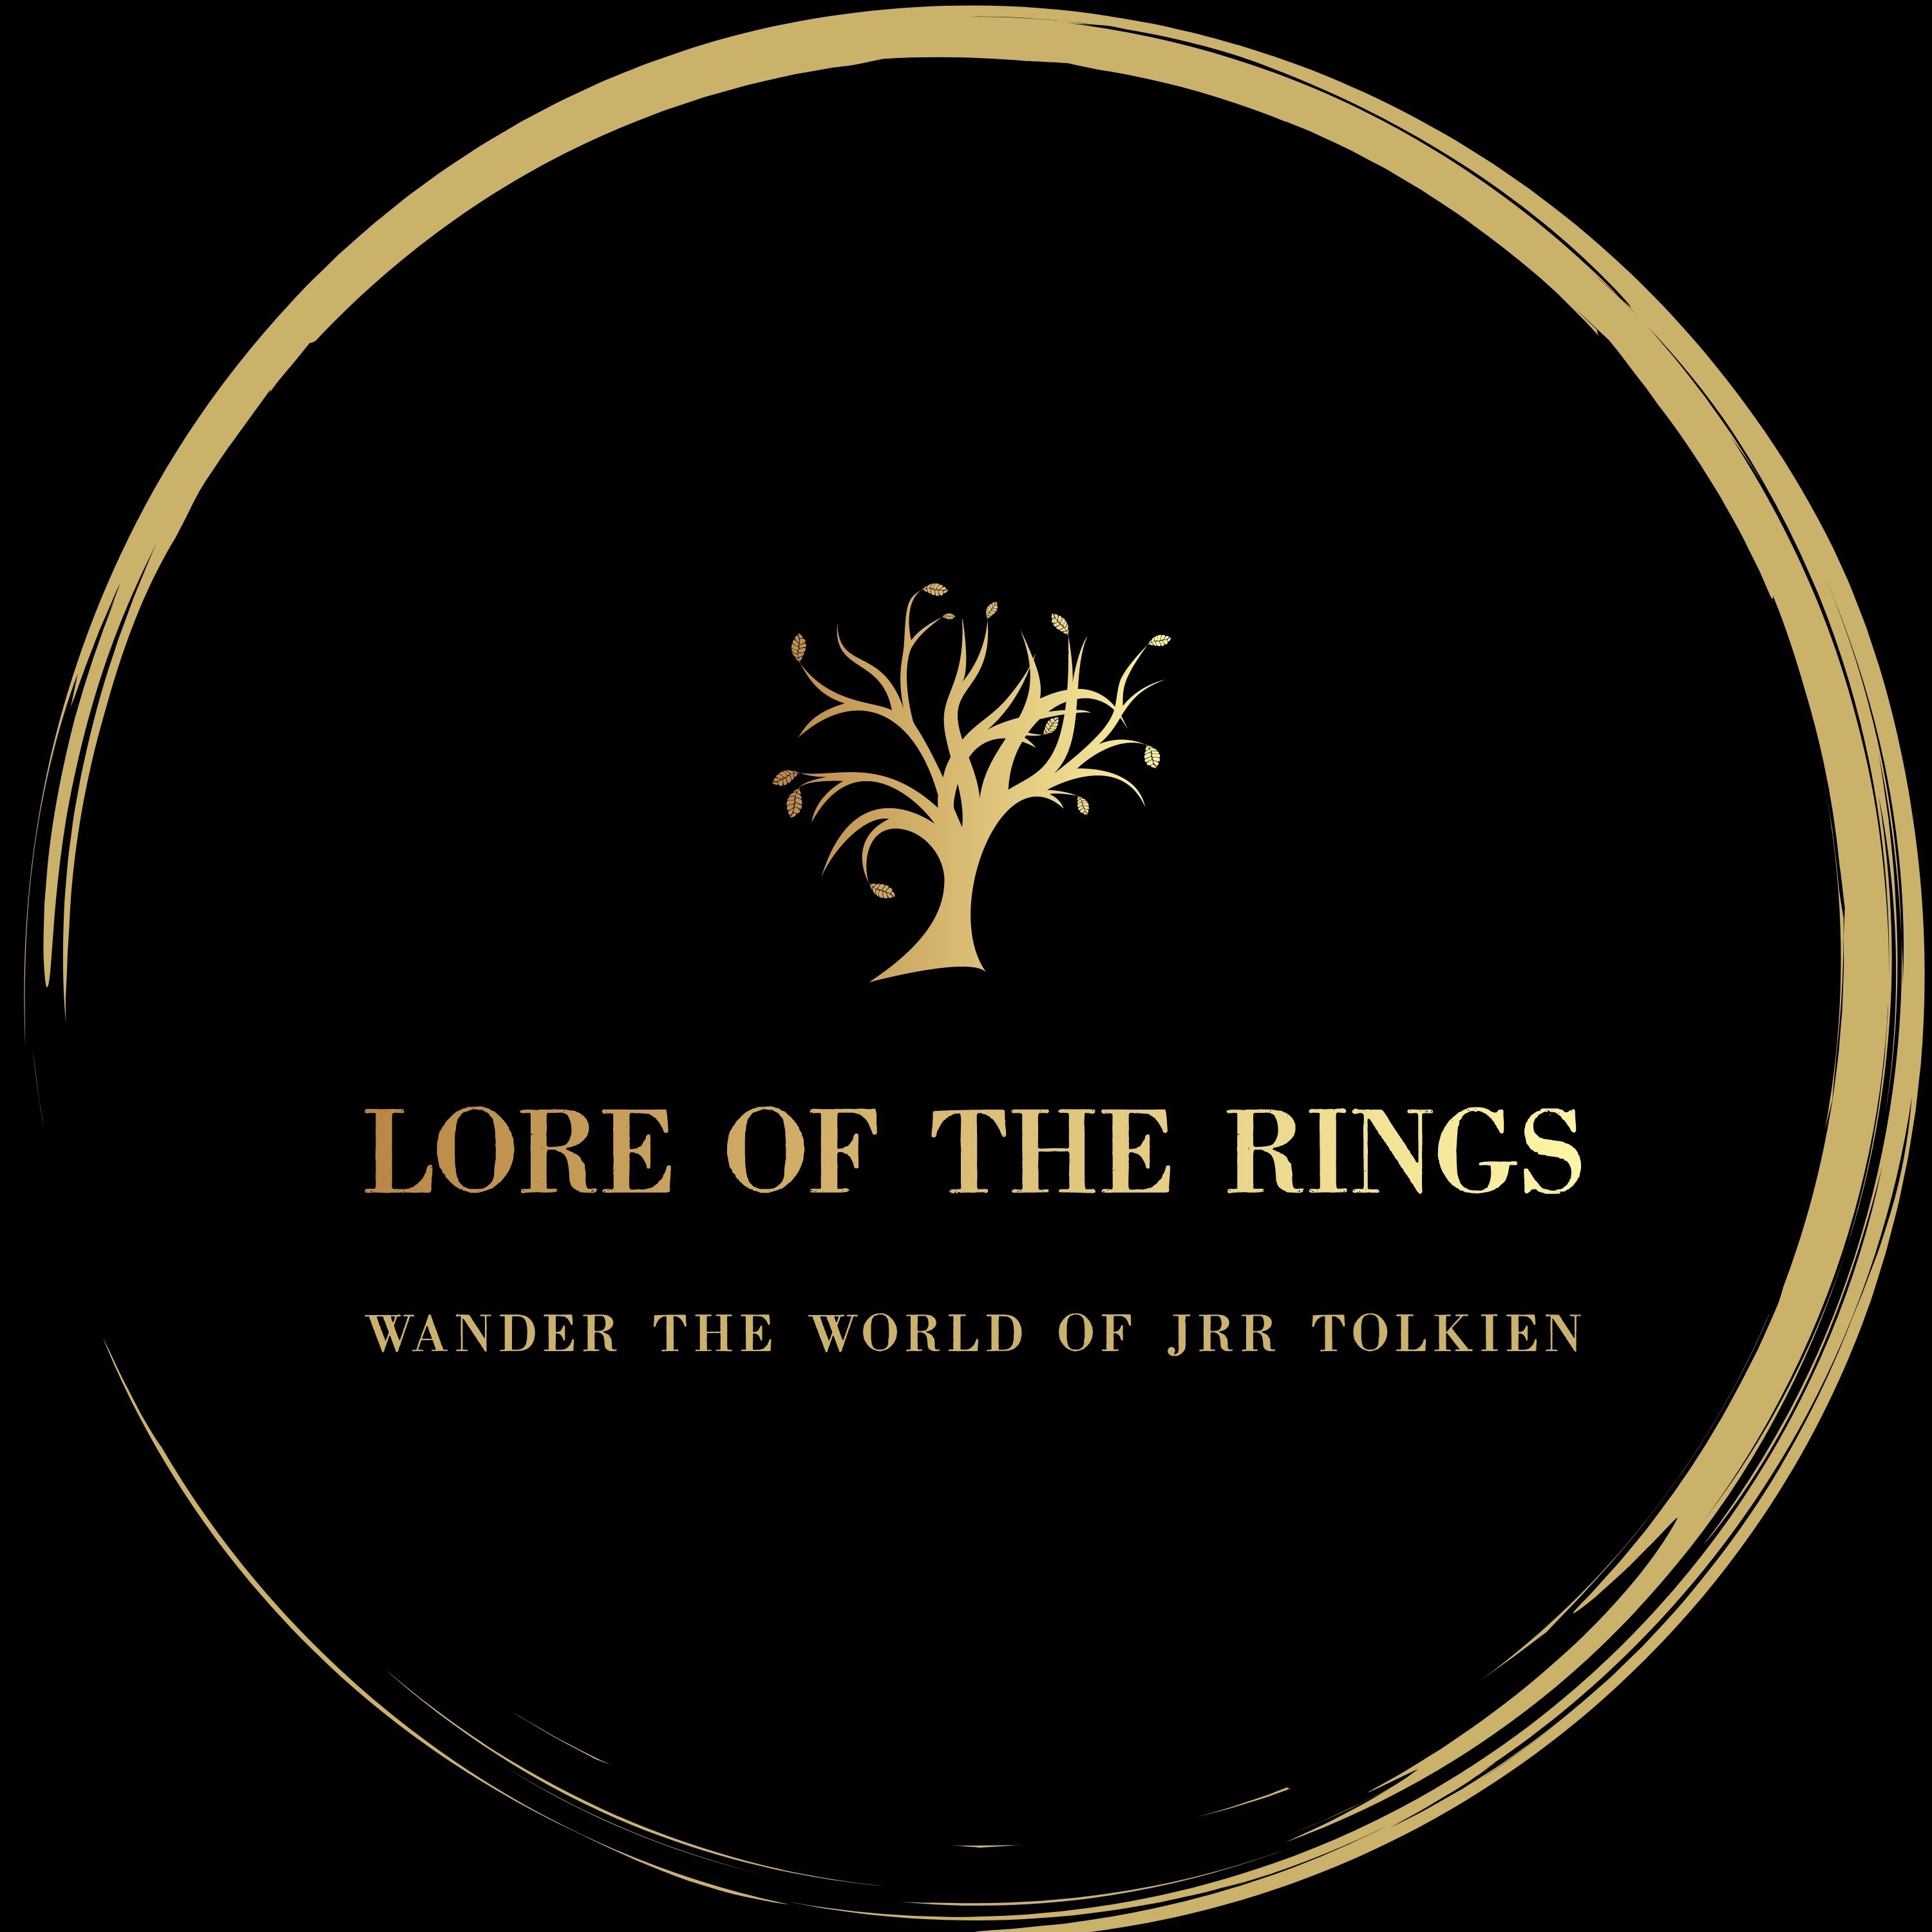 Council of Elrond » LotR News & Information » Glaurung & the Fall